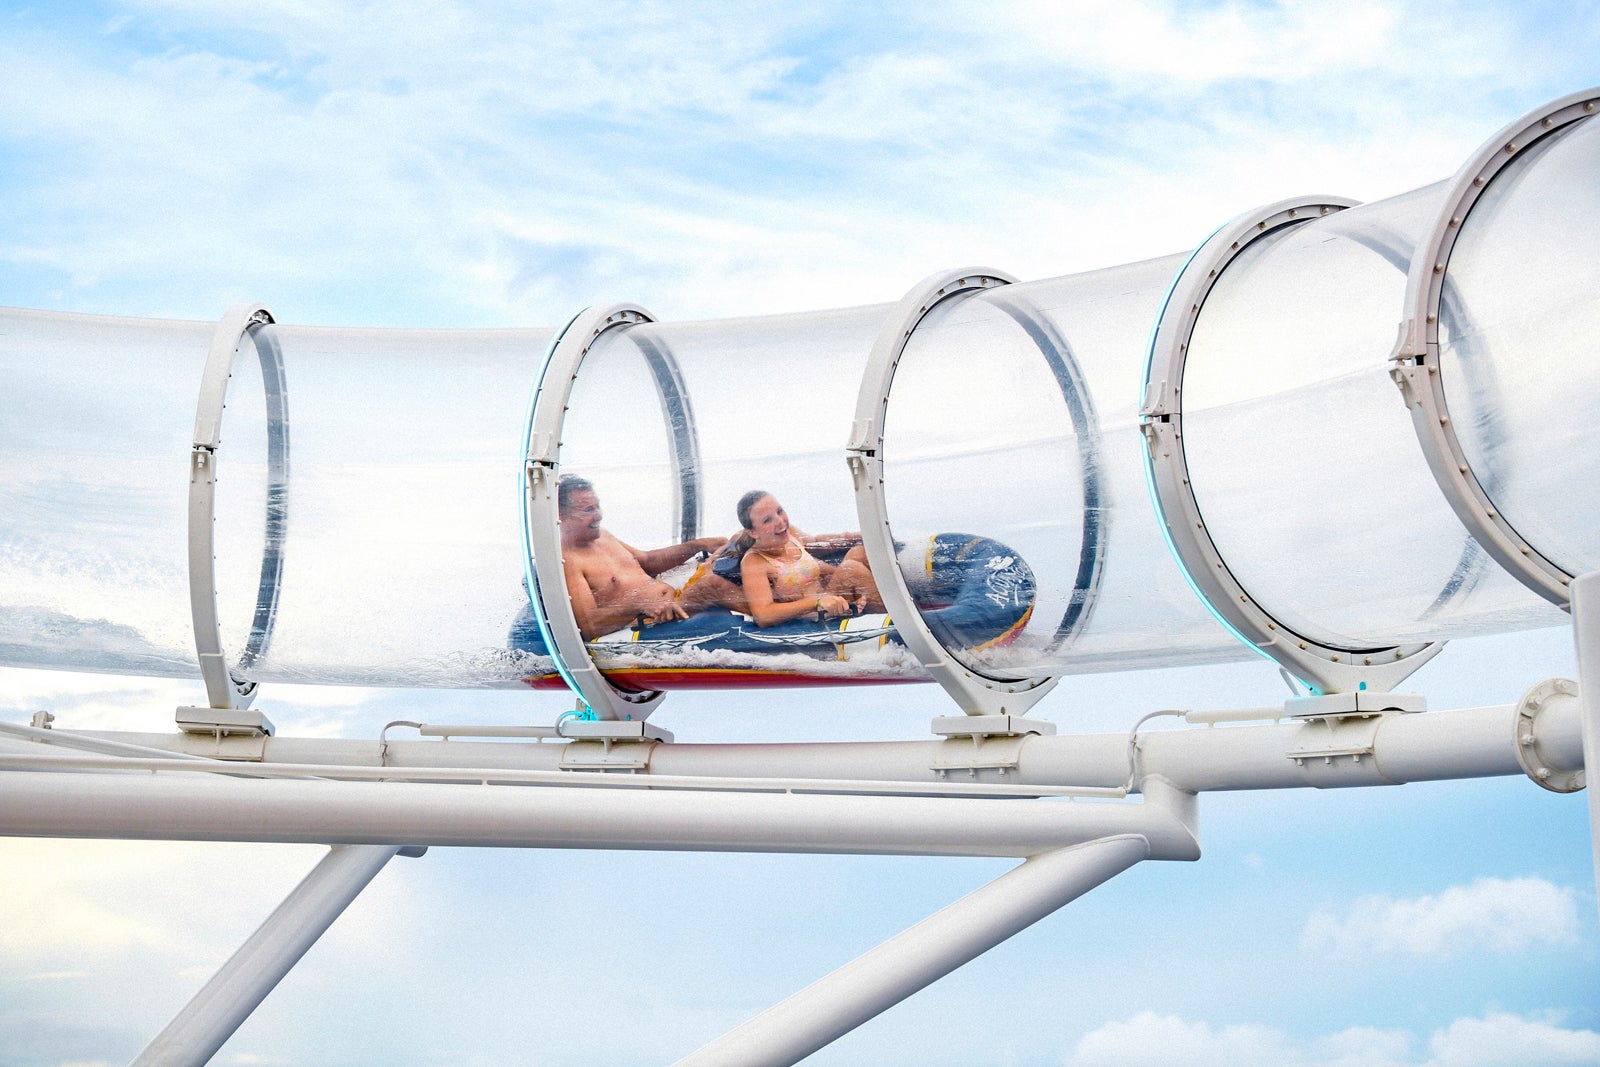 Two cruise passengers on double raft going through clear tube slide